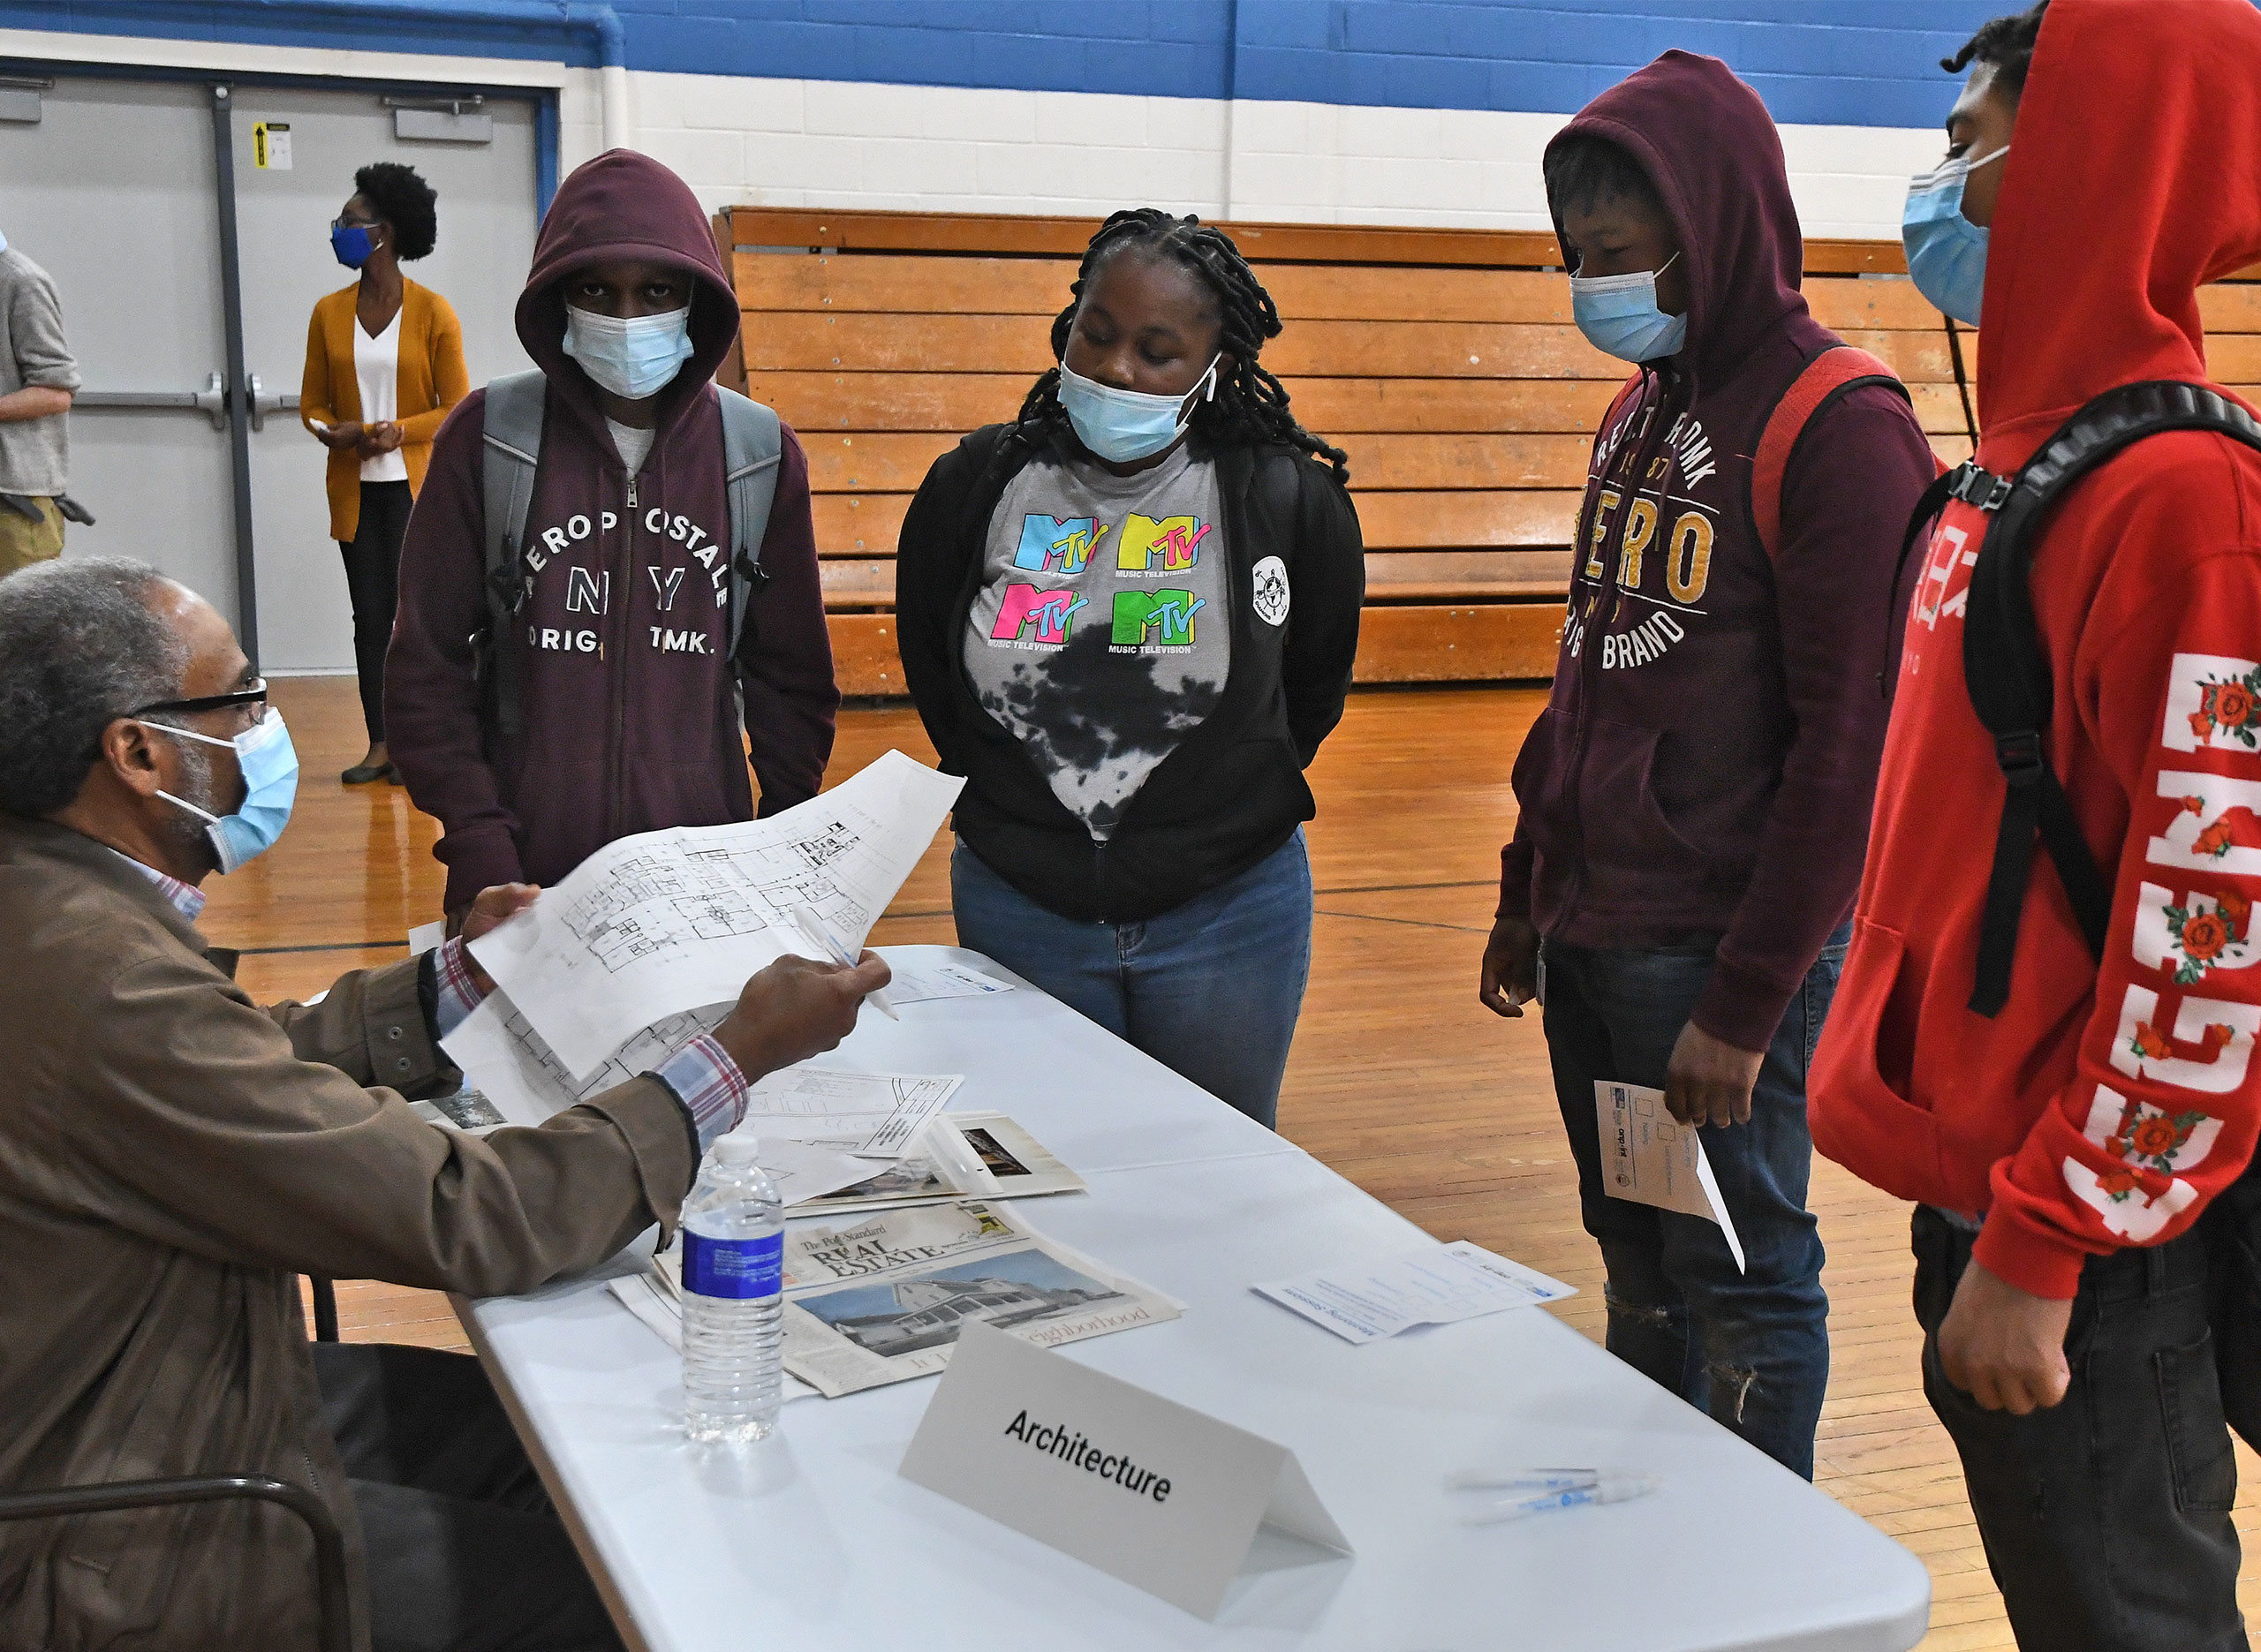 Hillside Highschool hosts a Career Connections program for Syracuse youth